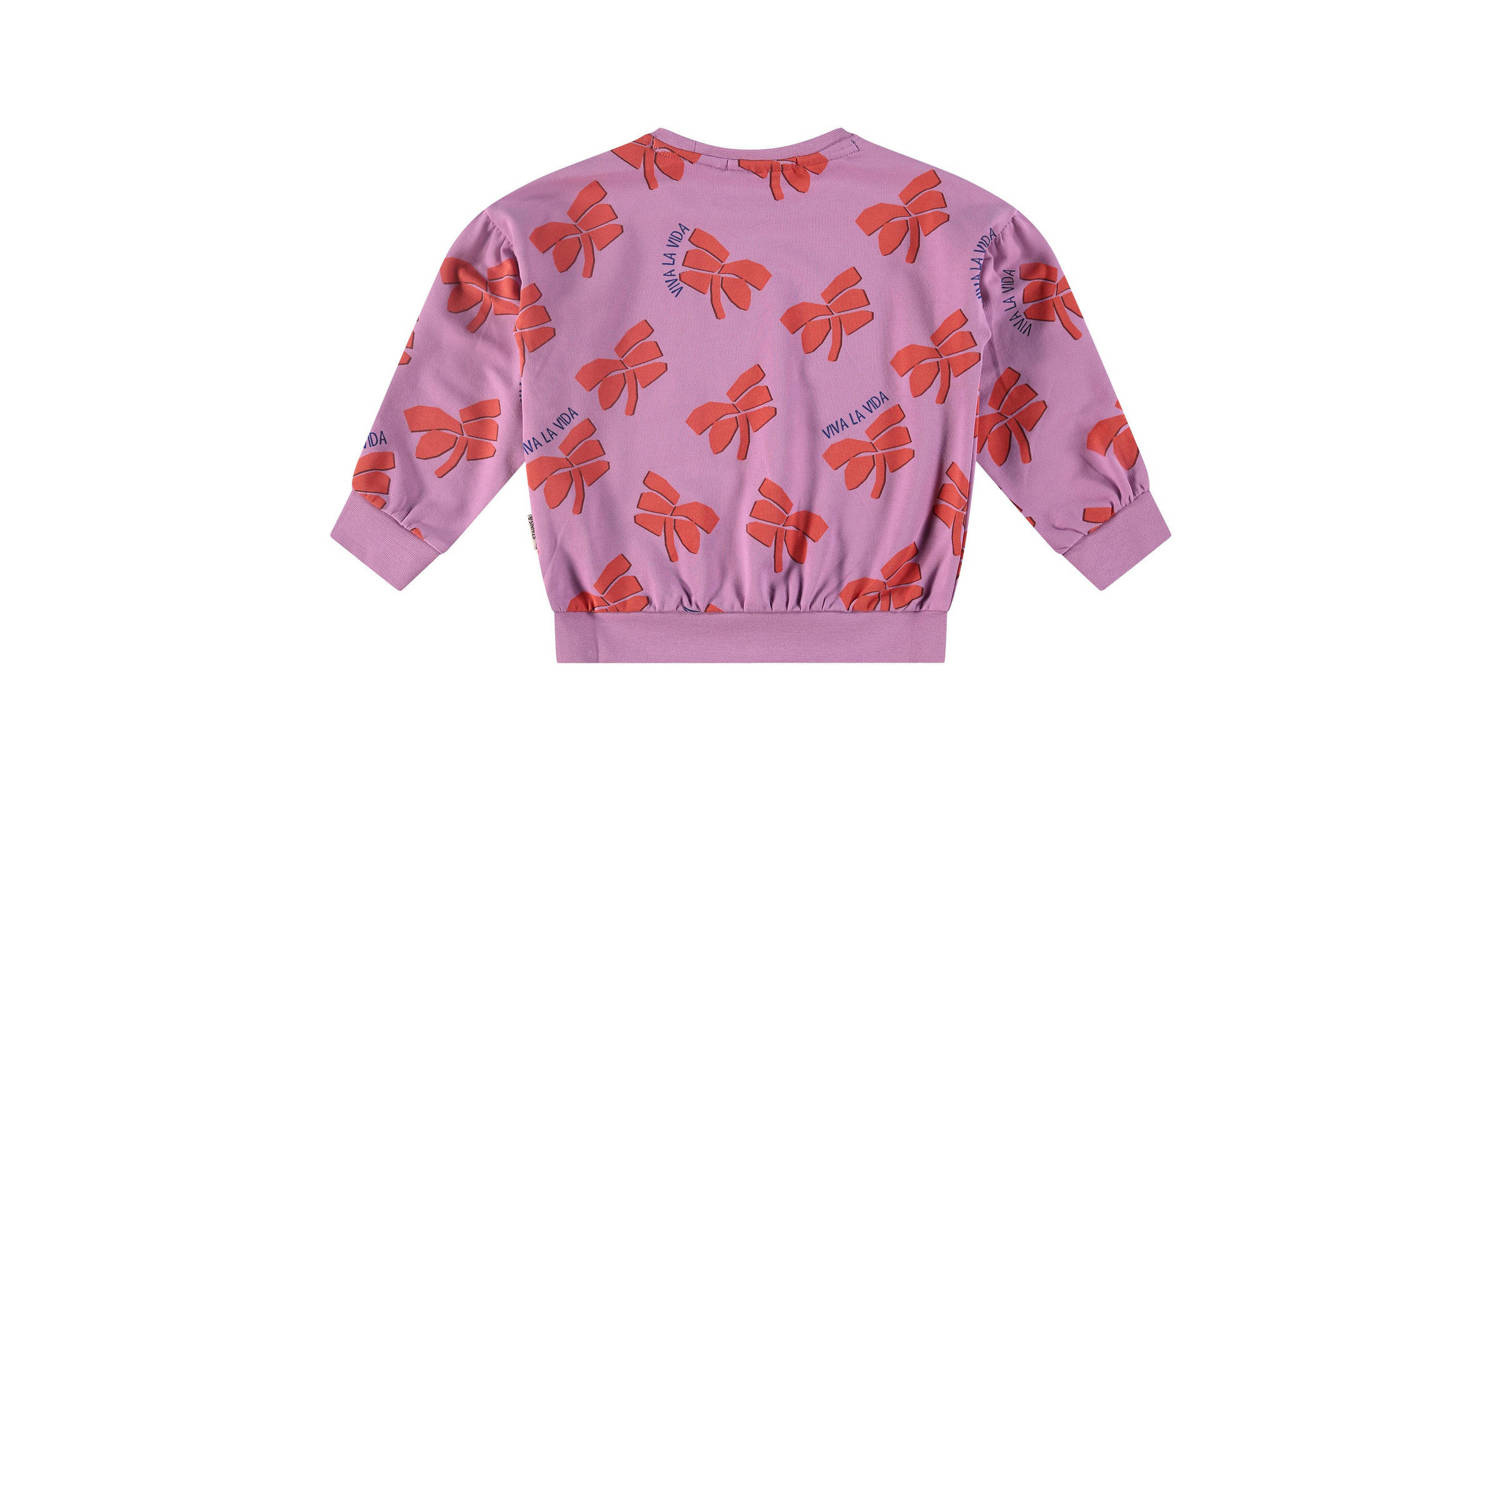 Stains&Stories sweater met all over print paars oranje